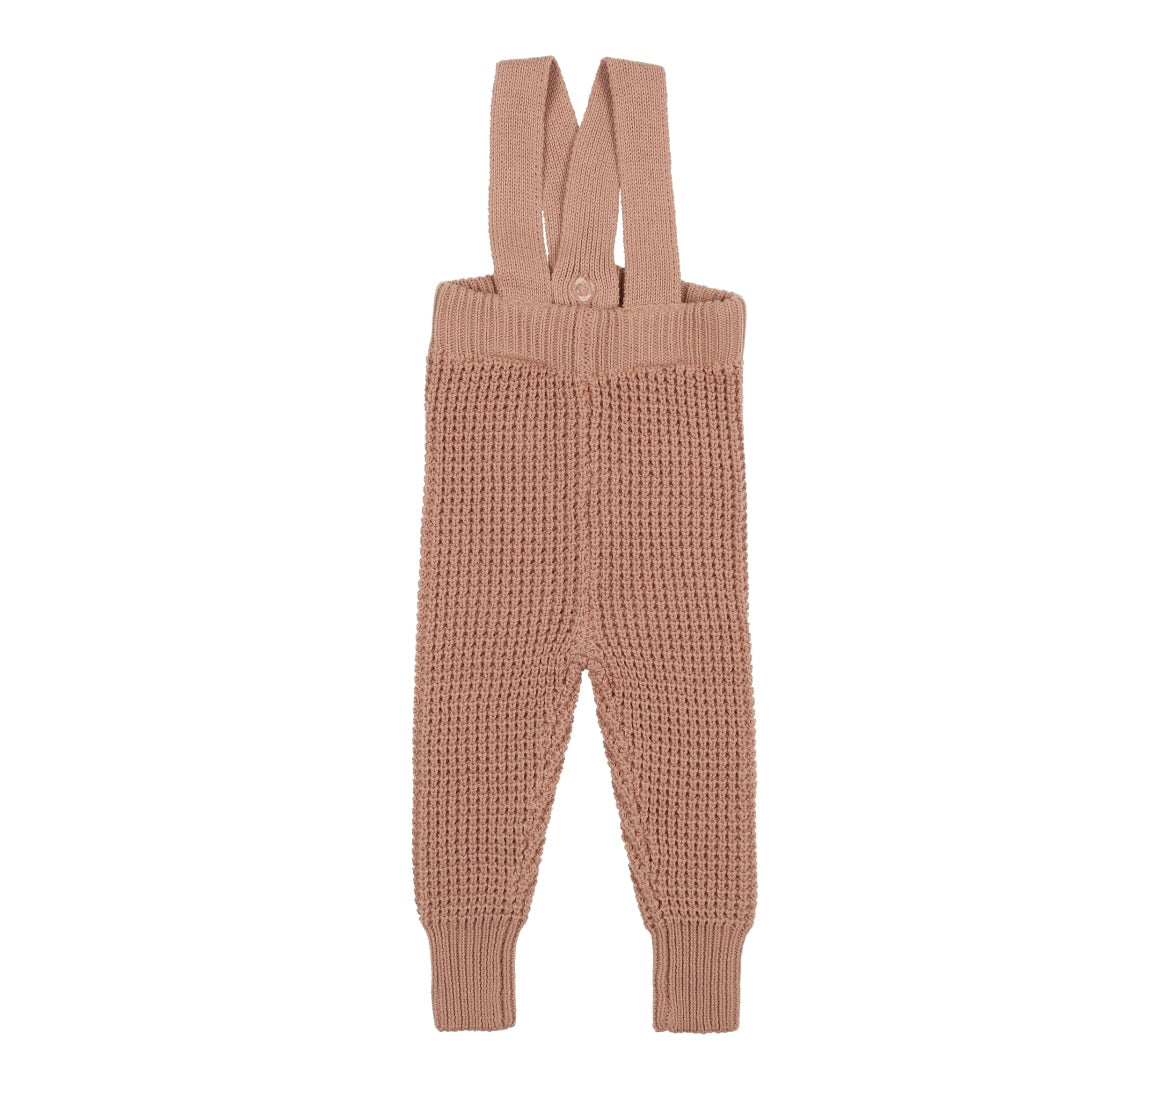 Analogie Dusty Pink Waffle Knit Long Overalls